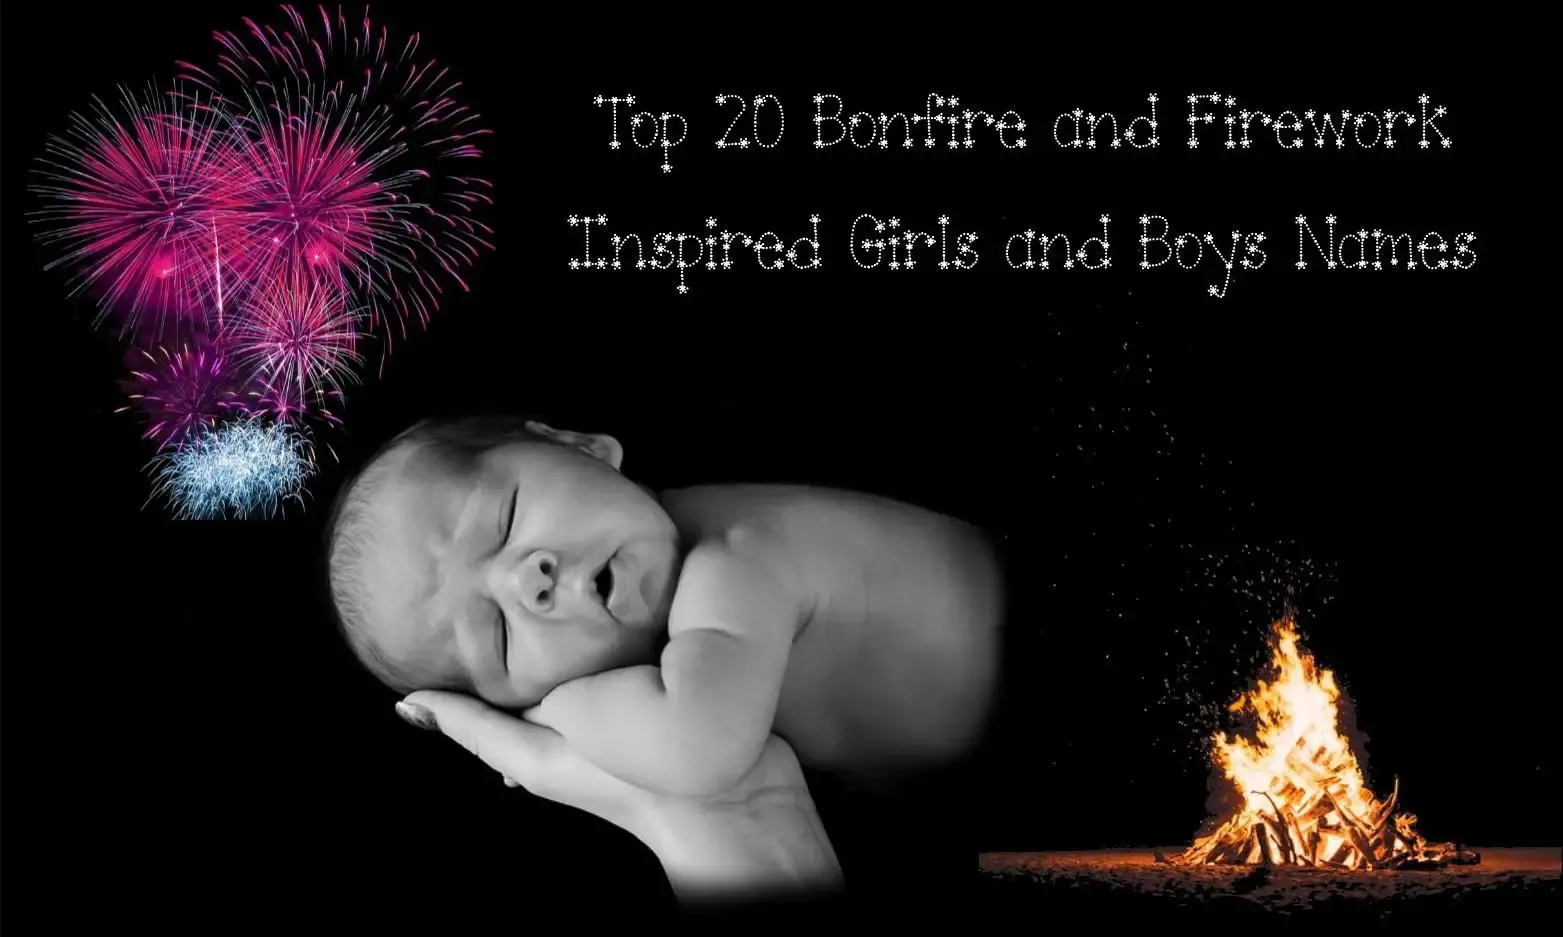 Top 20 Bonfire and Firework Inspired Girls and Boys Names